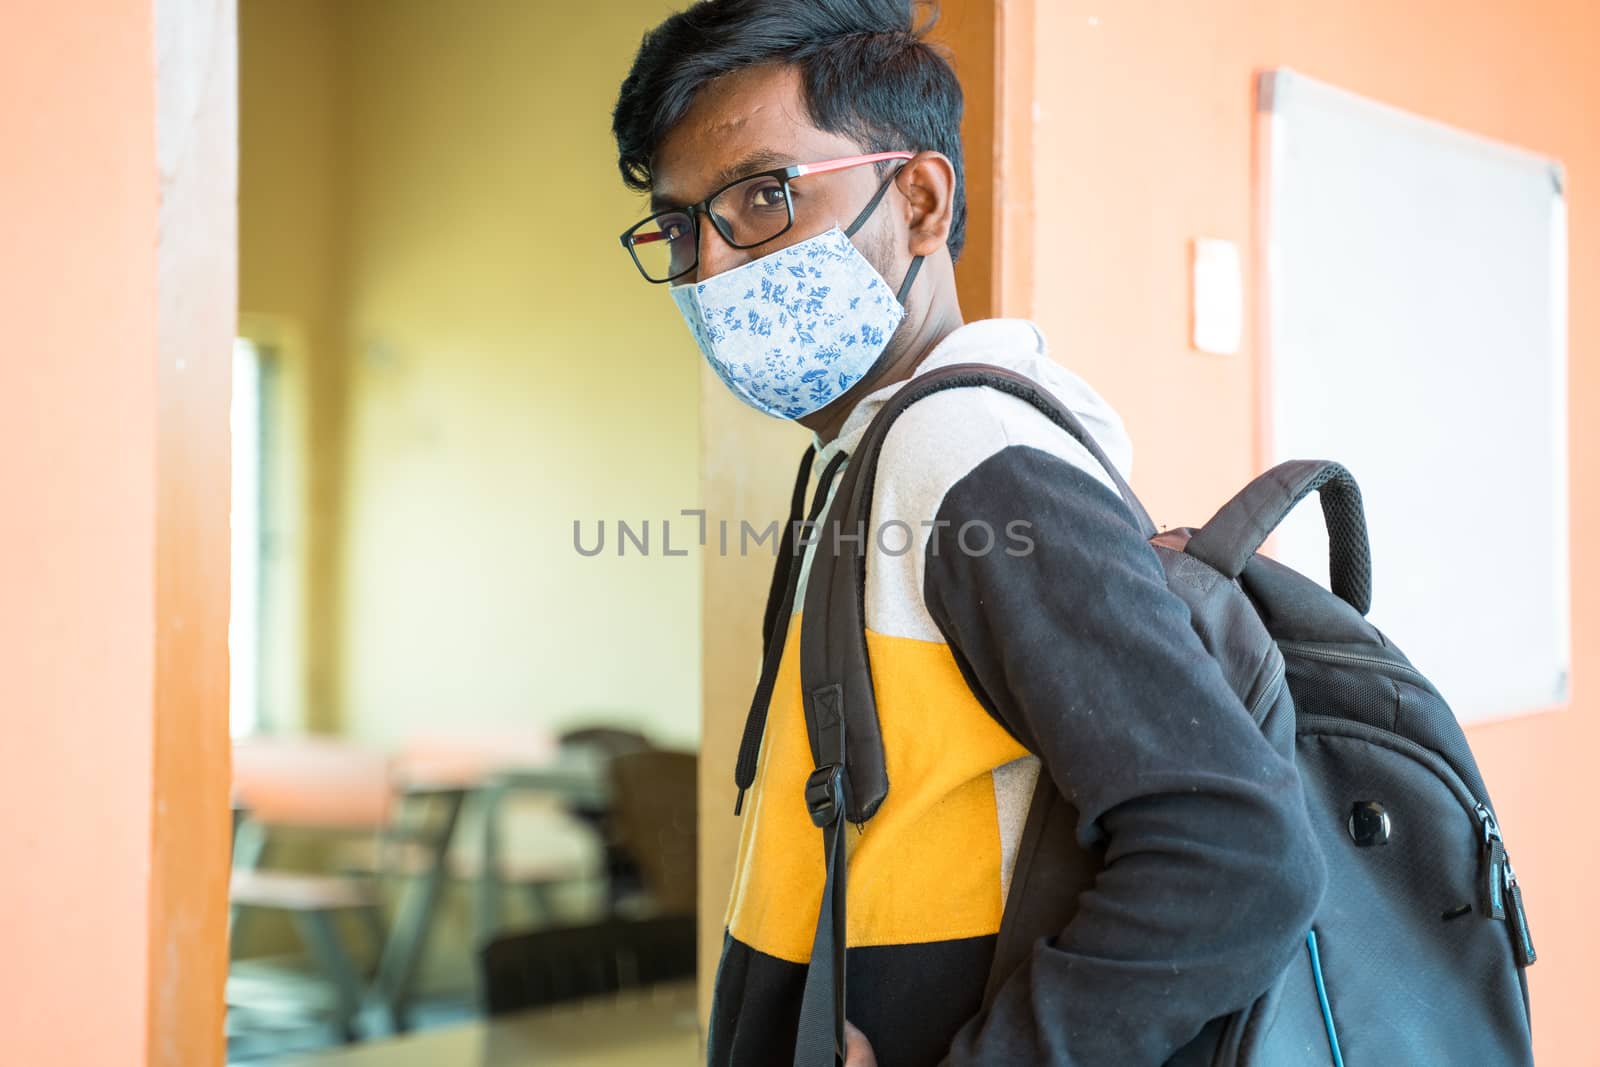 College student with face mask looking into camera before entering classroom - concept of college reopen, new normal lifestyle after coronavirus or covid-19 pandemic by lakshmiprasad.maski@gmai.com